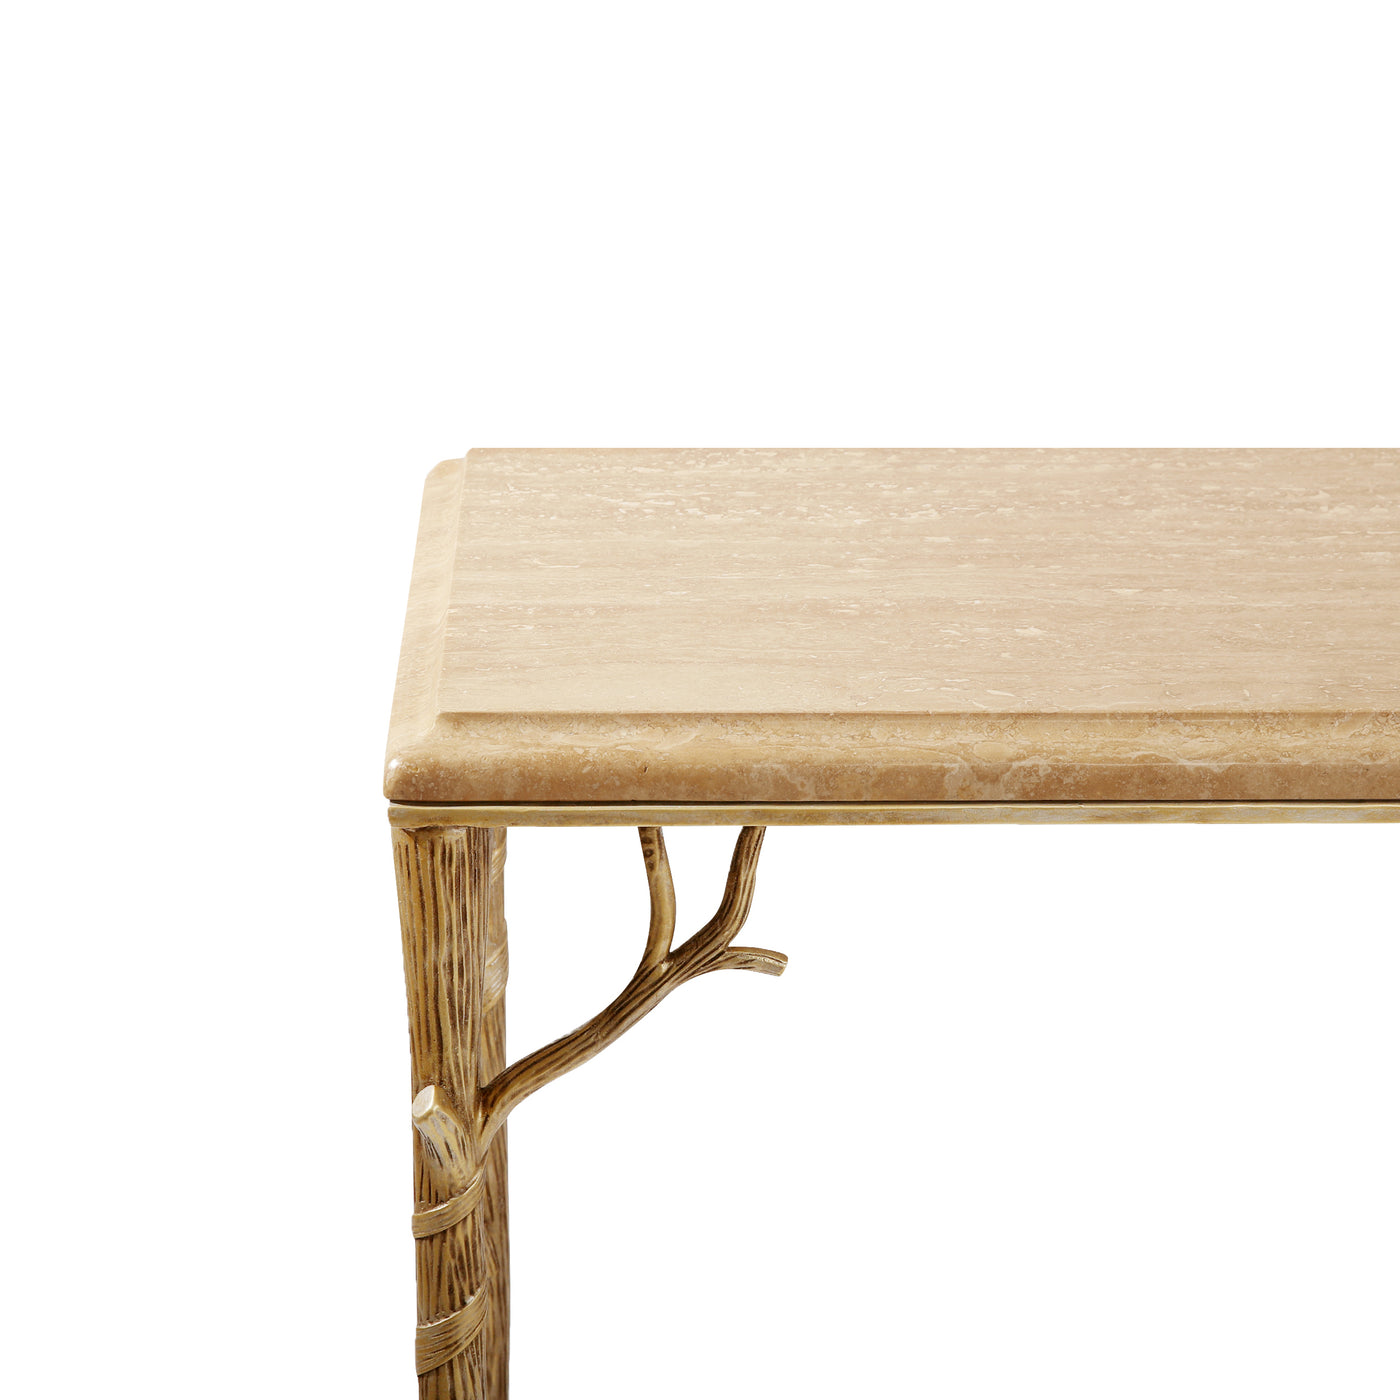 Corner close up of a luxury console table showing natural travertine marble top and organic branch inspired base